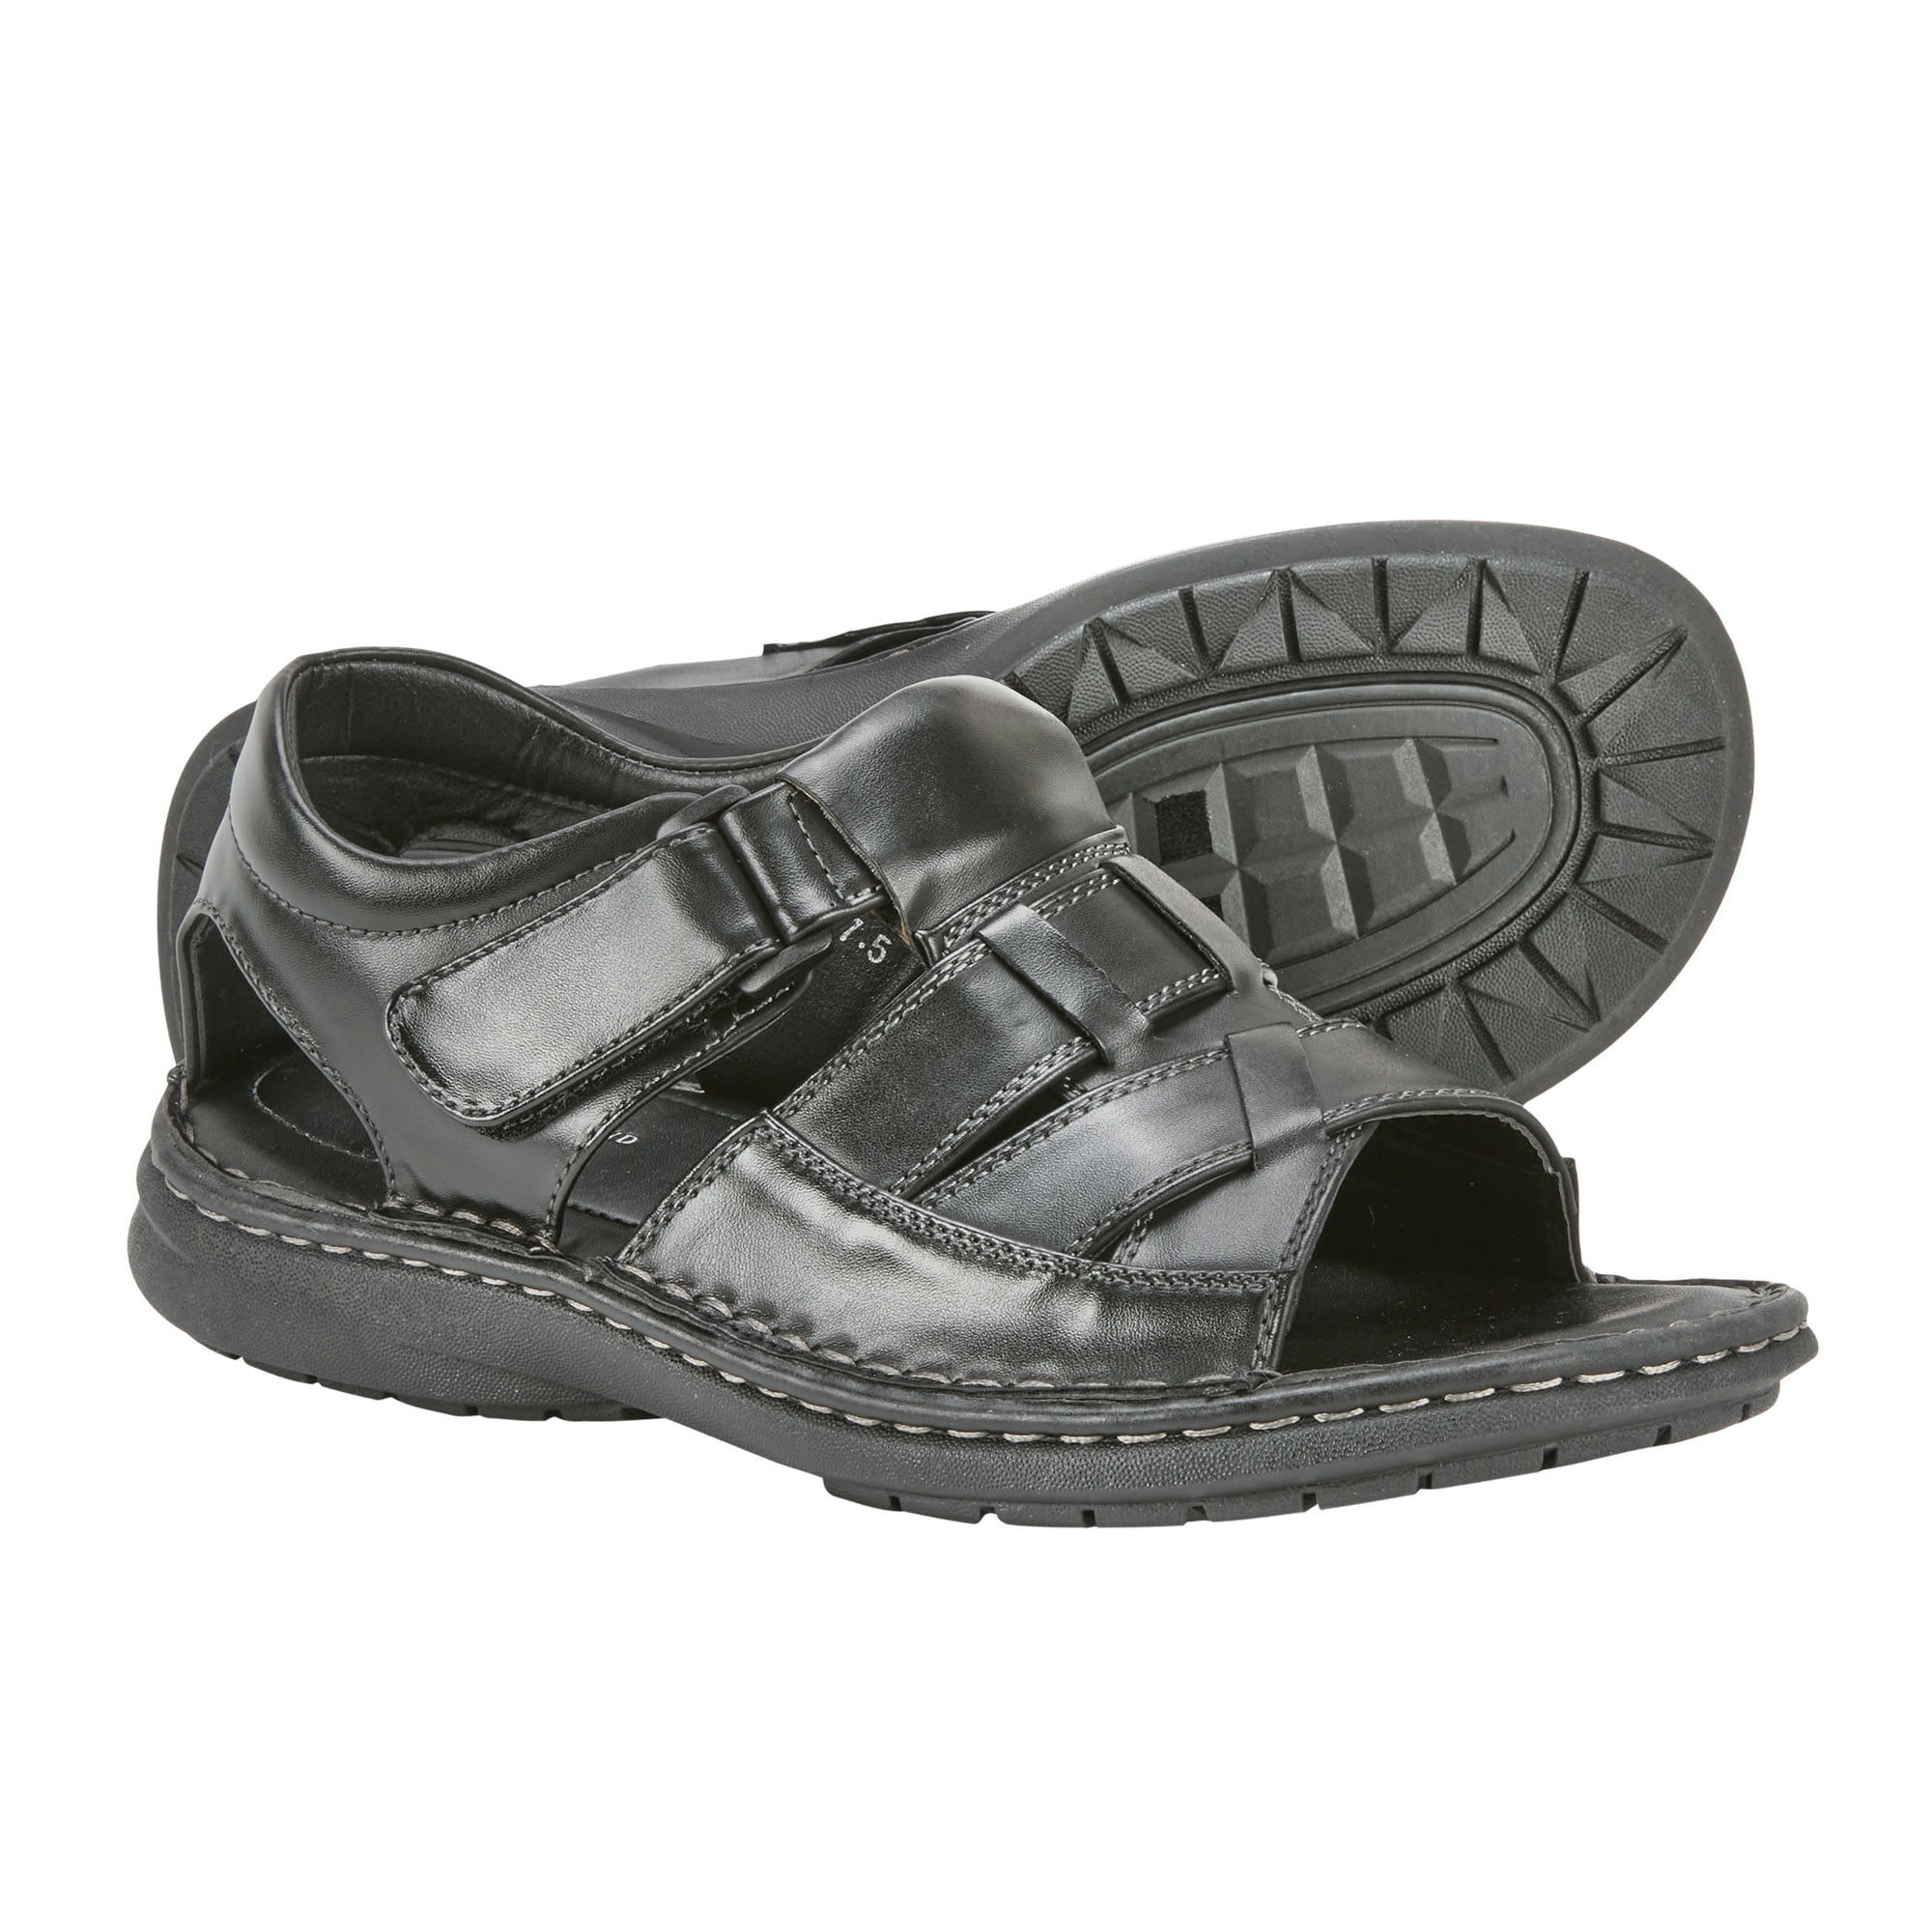 Mens Sandals Arch Support